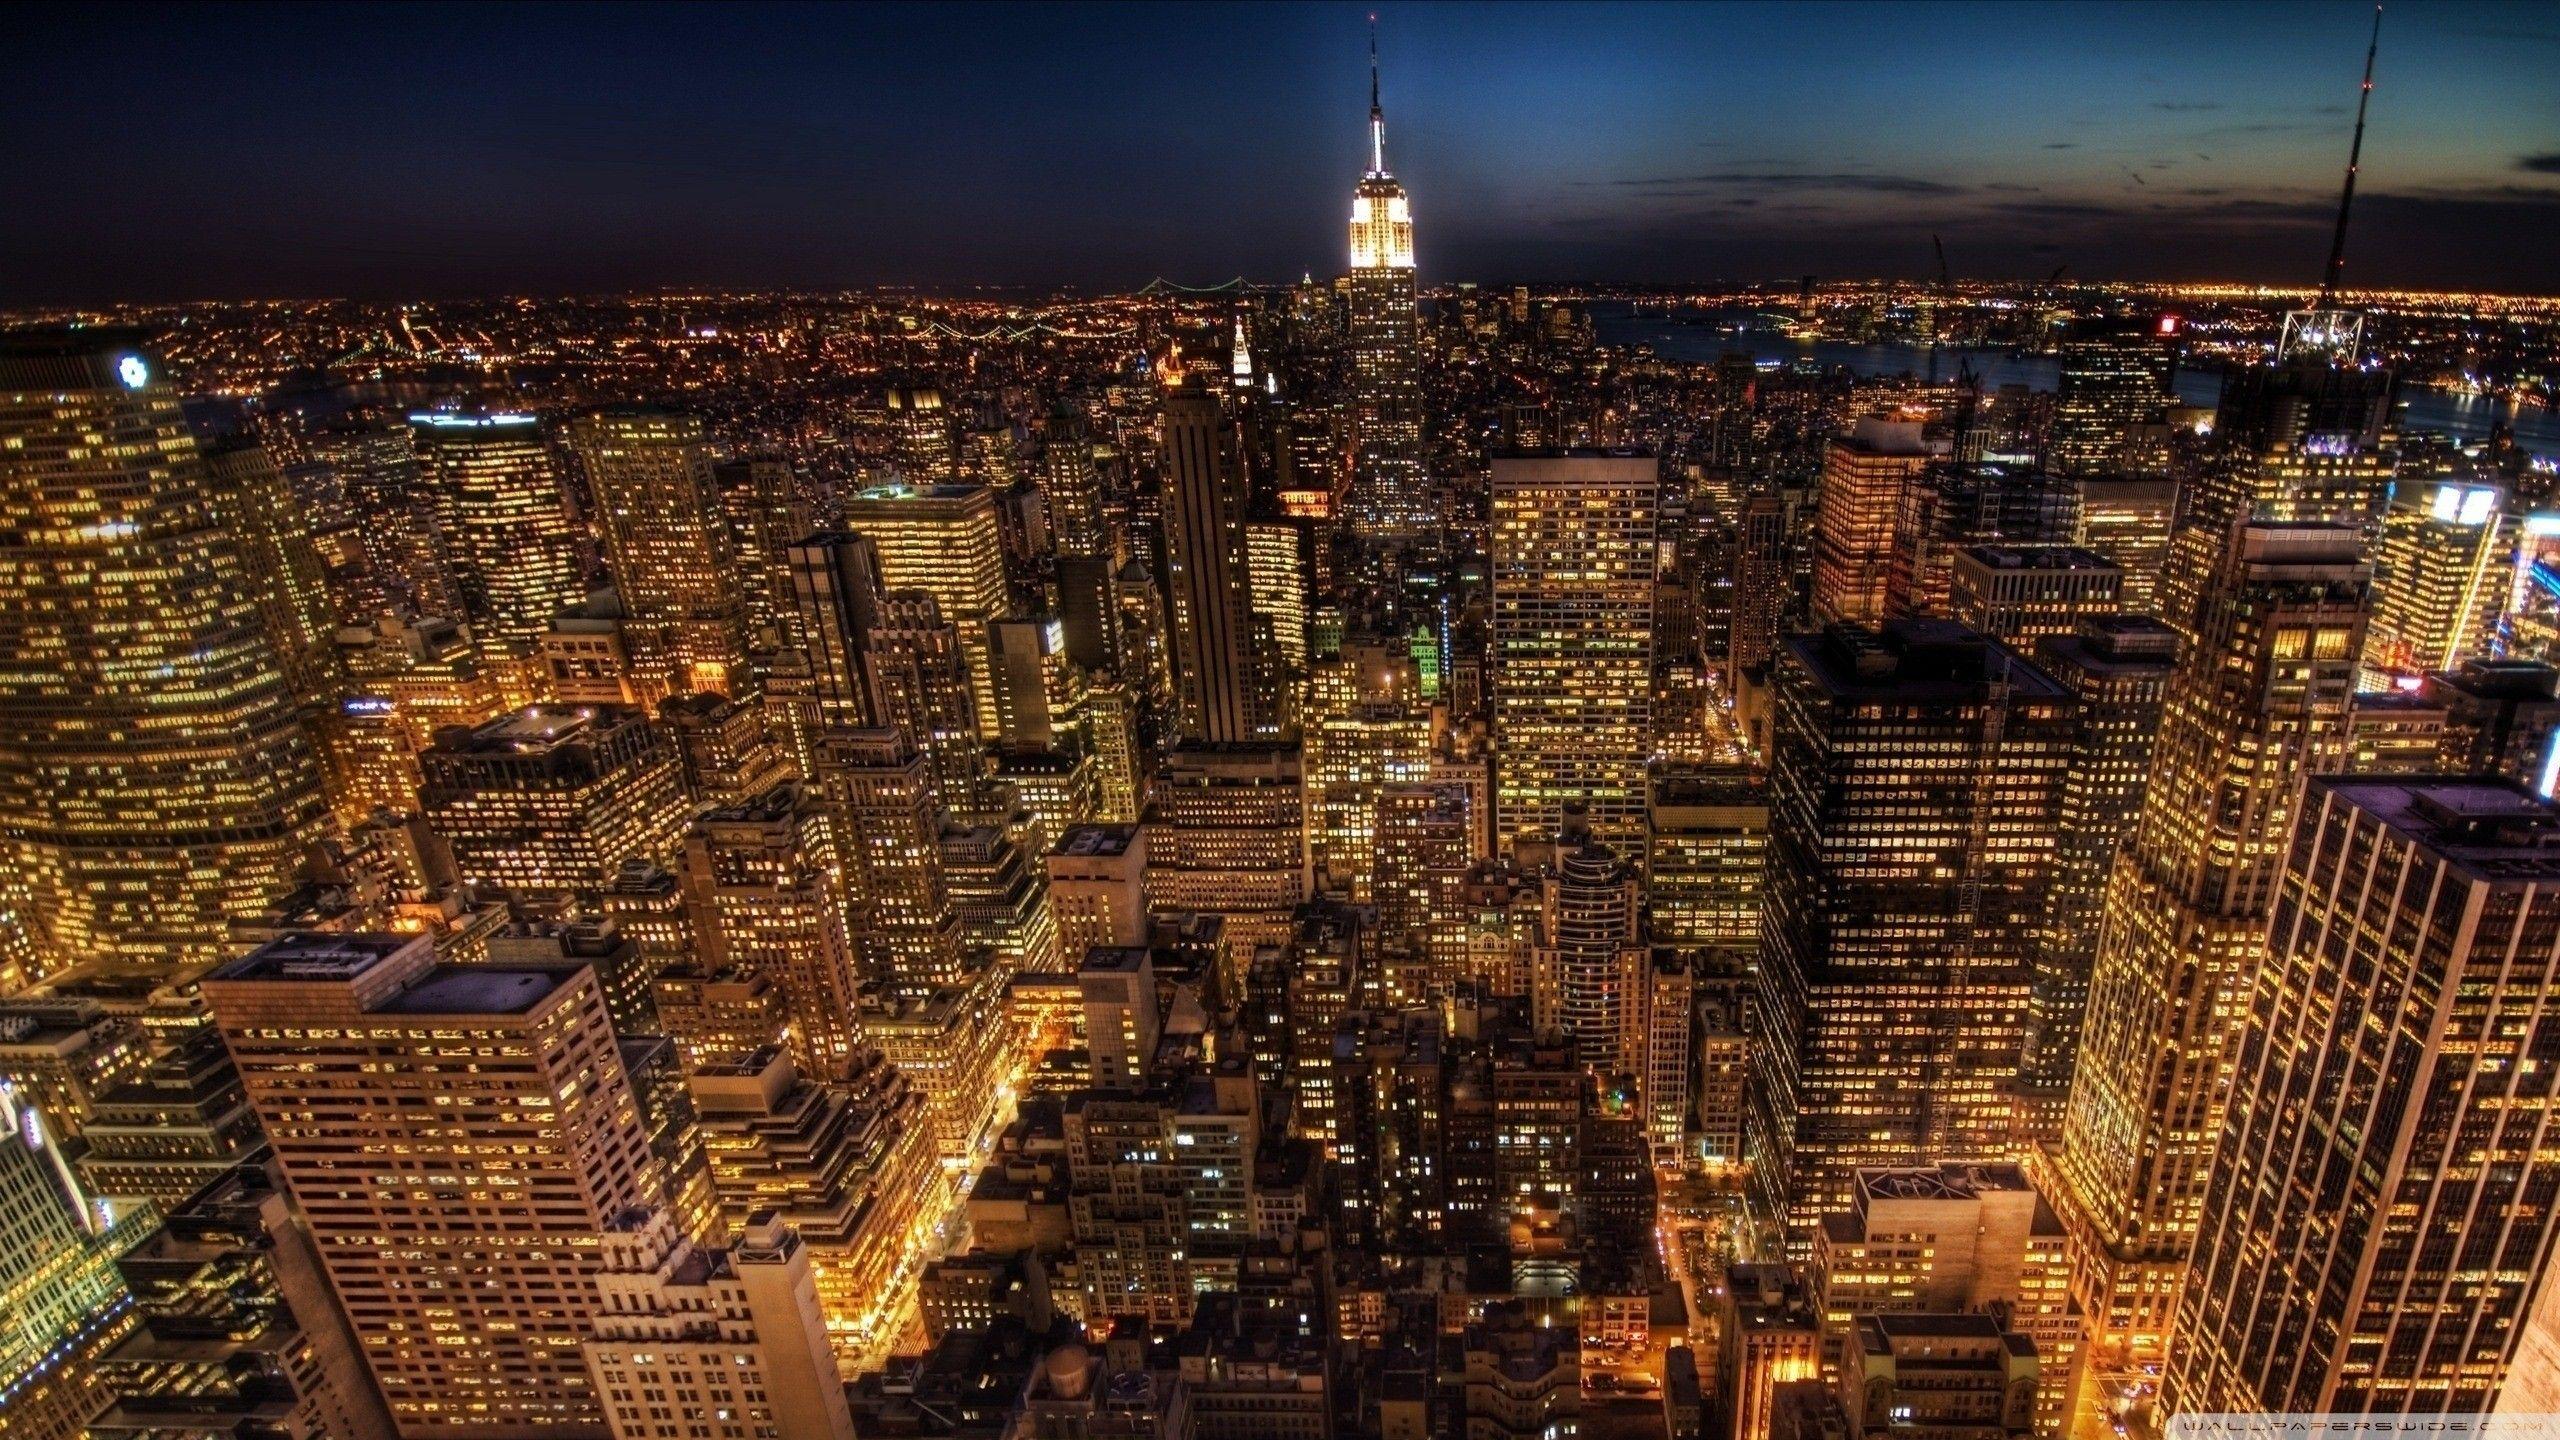 City lights aerial view wallpaper. PC